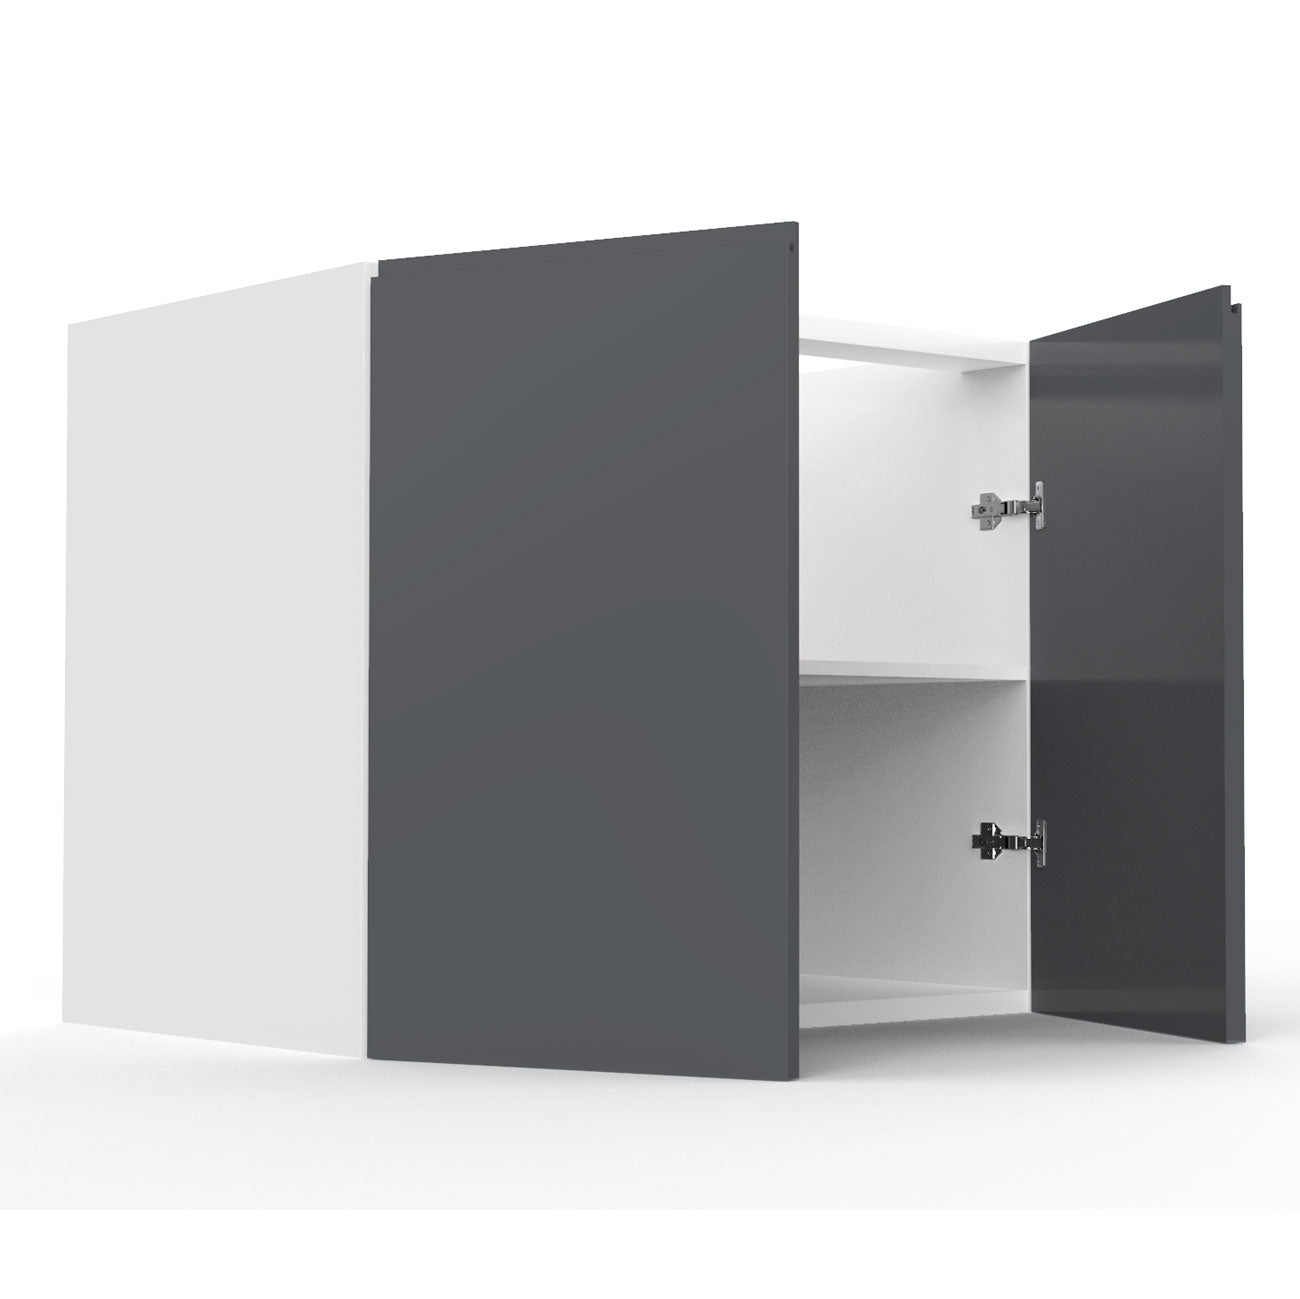 RTA - Lacquer Grey - Full Height Double Door Base Cabinets | 36"W x 30"H x 23.8"D